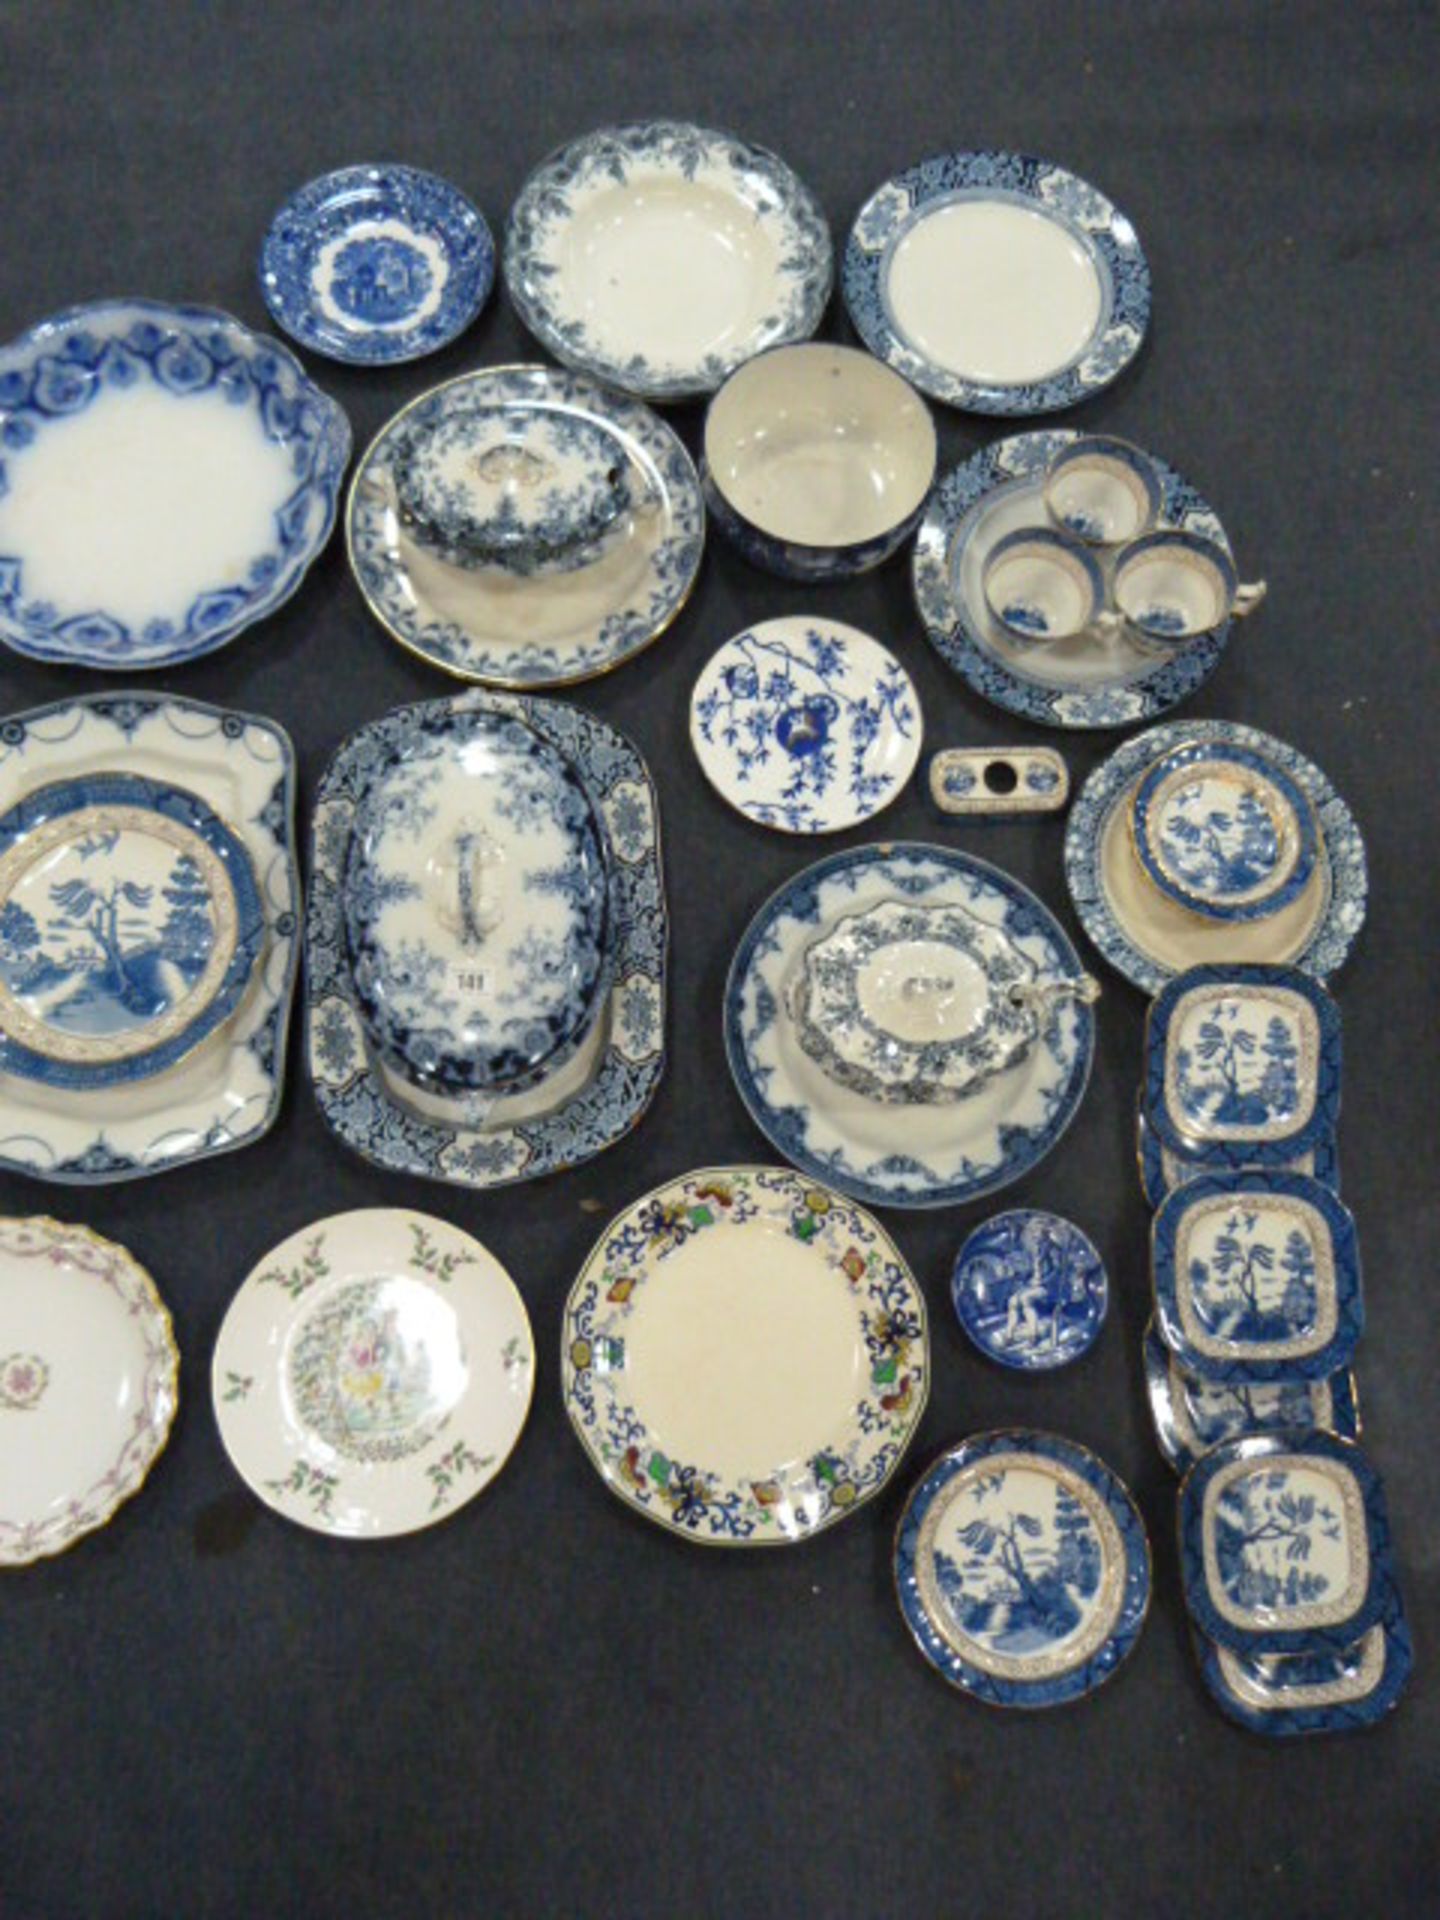 2 Boxes of Blue & White China Wares - Image 2 of 2